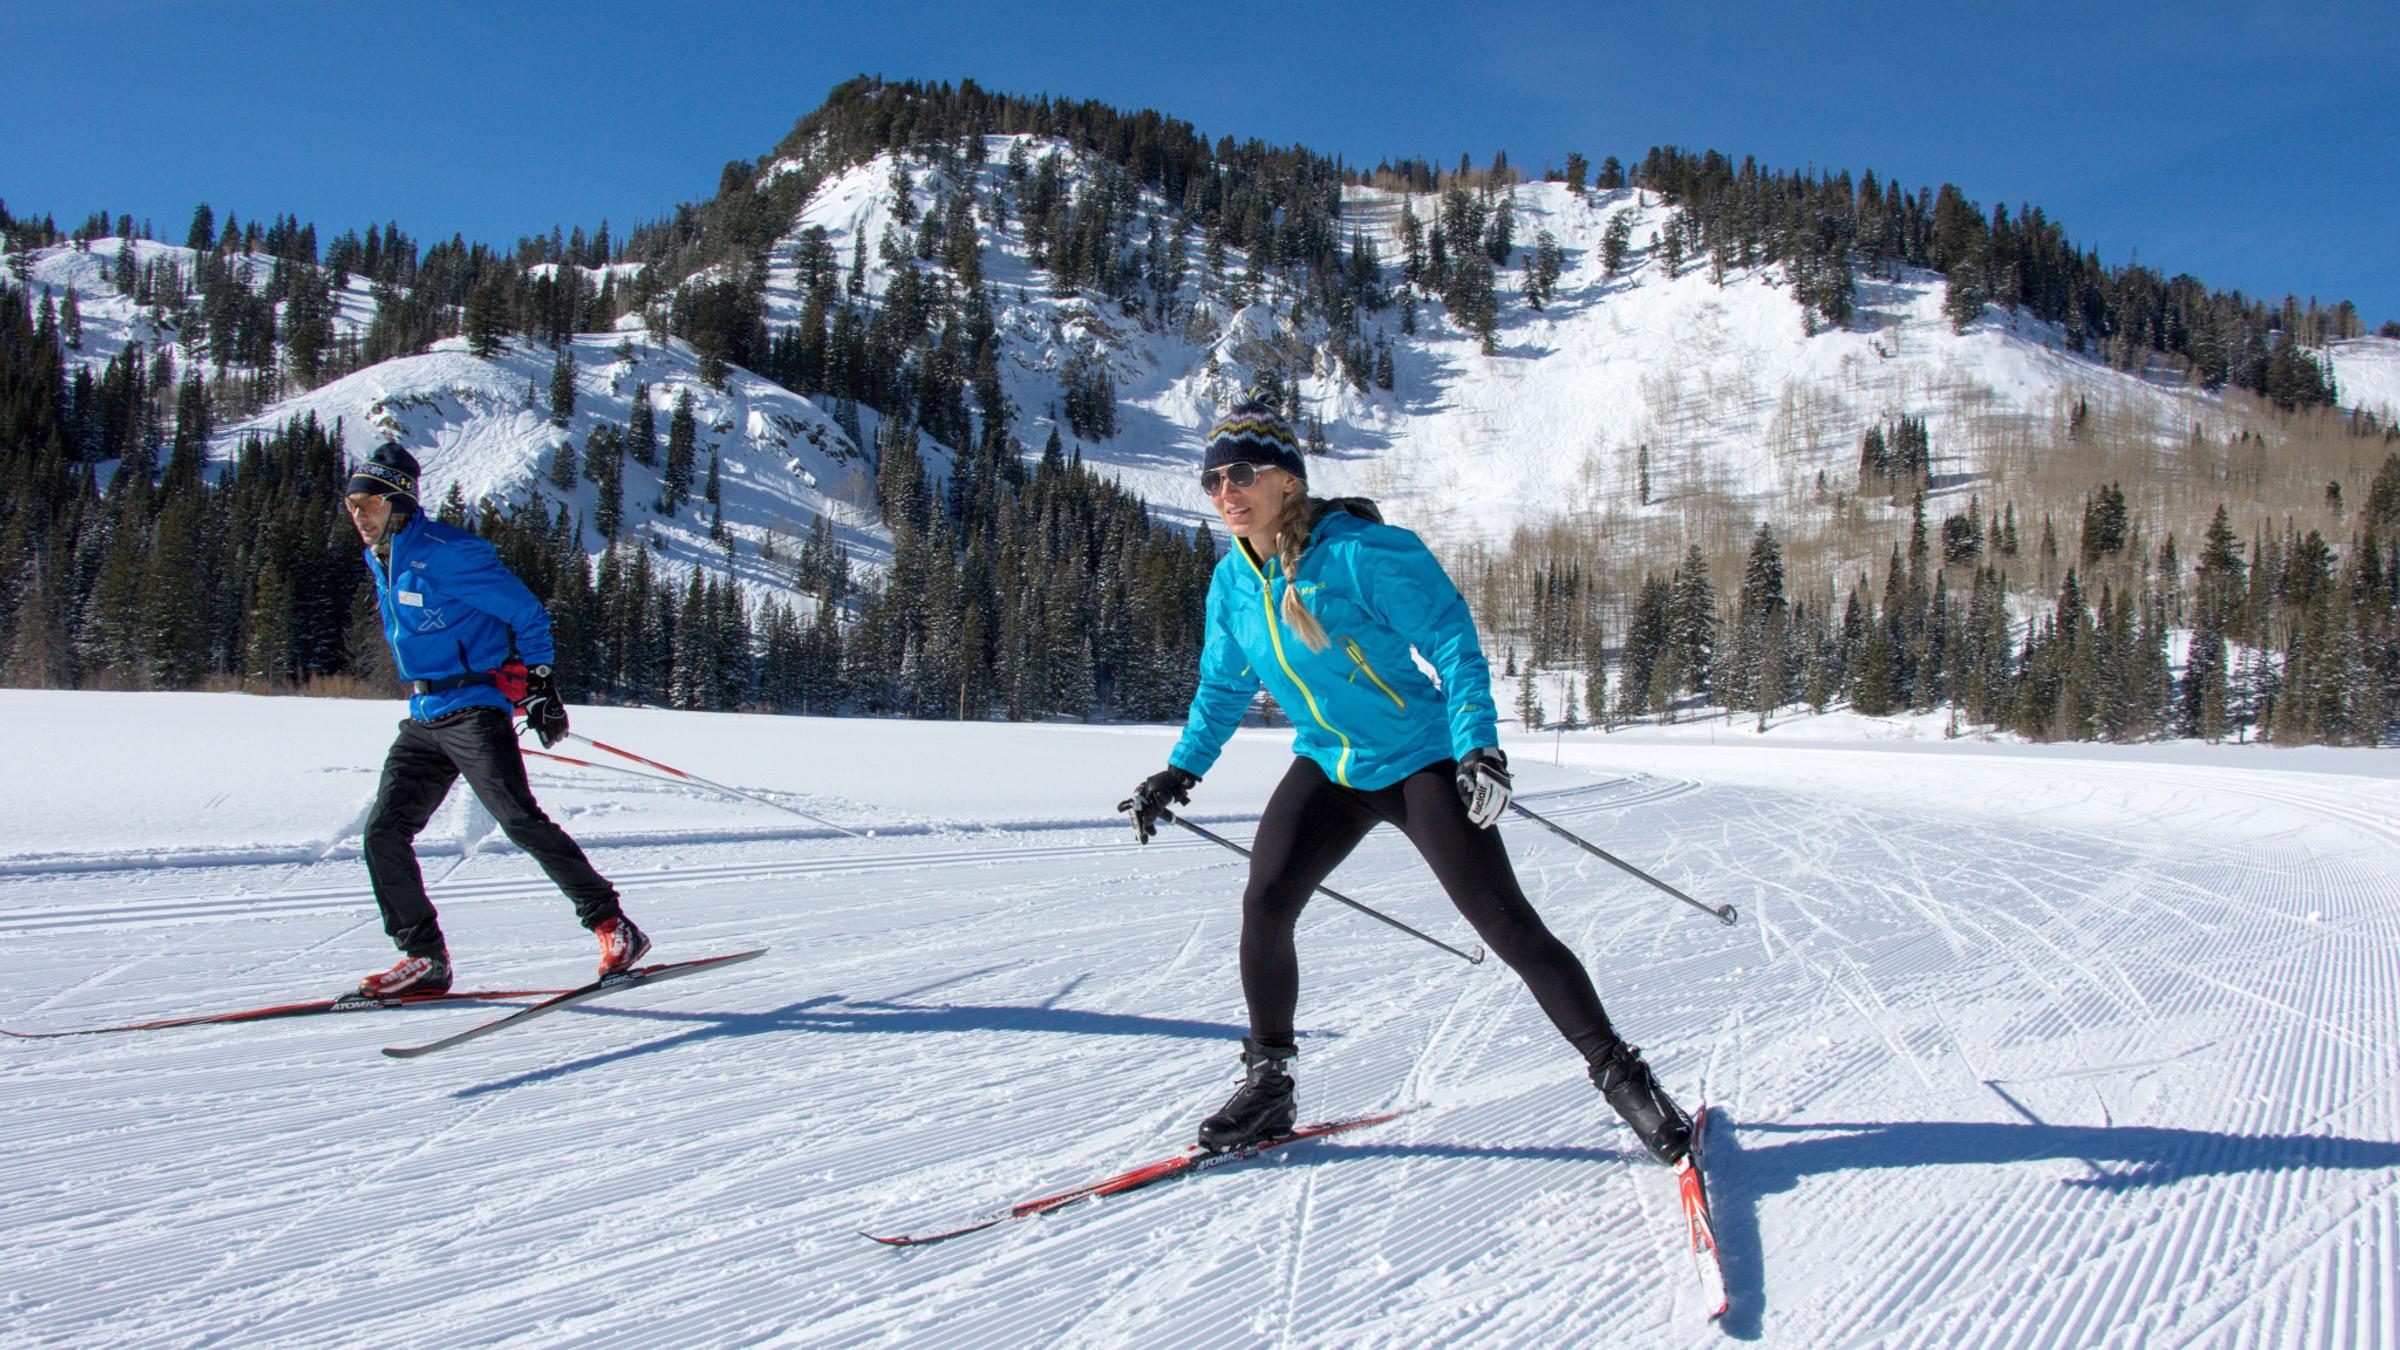 A man and women Nordic skiing on groomed trails with blue sky